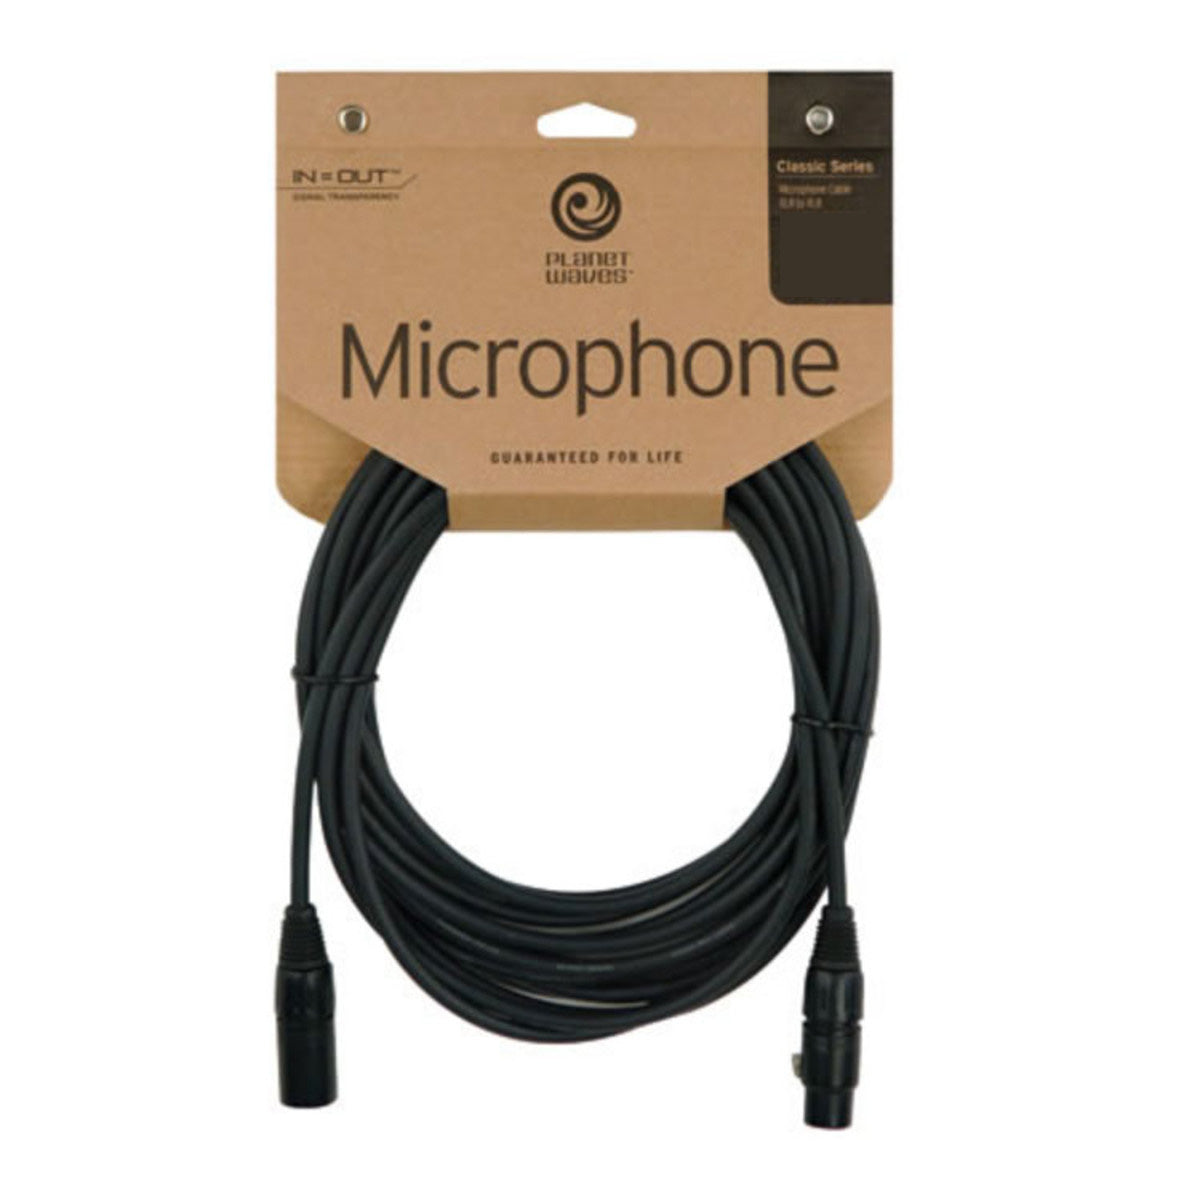 Planet Waves Classic Series Mic Cable 25ft